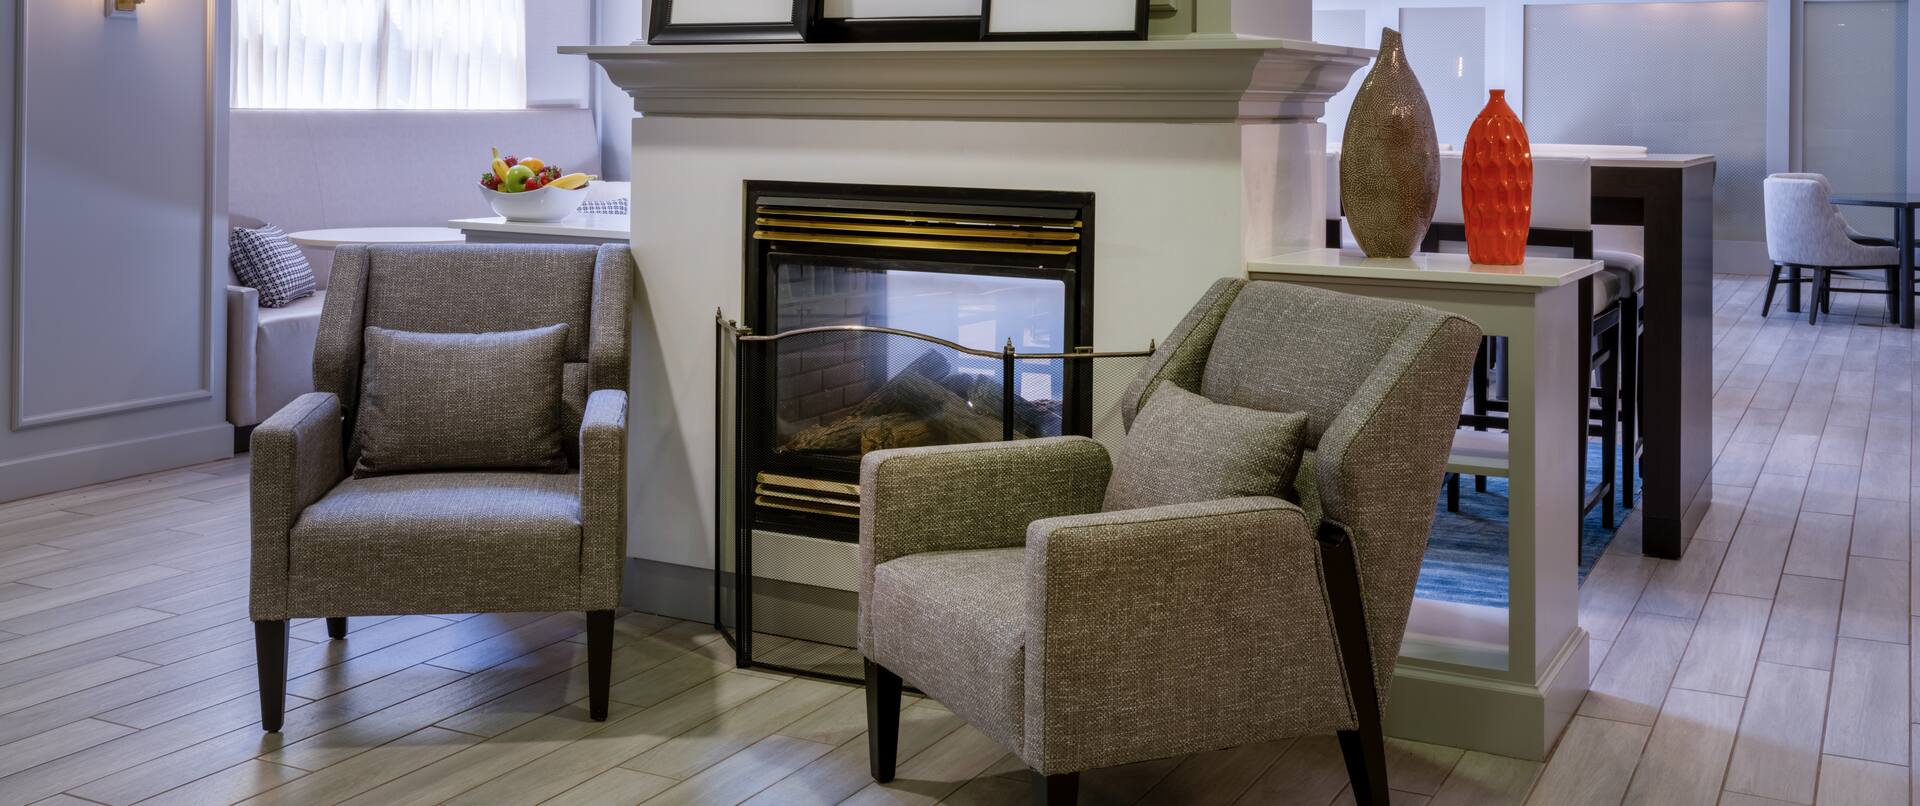 Lobby Seating by Fireplace